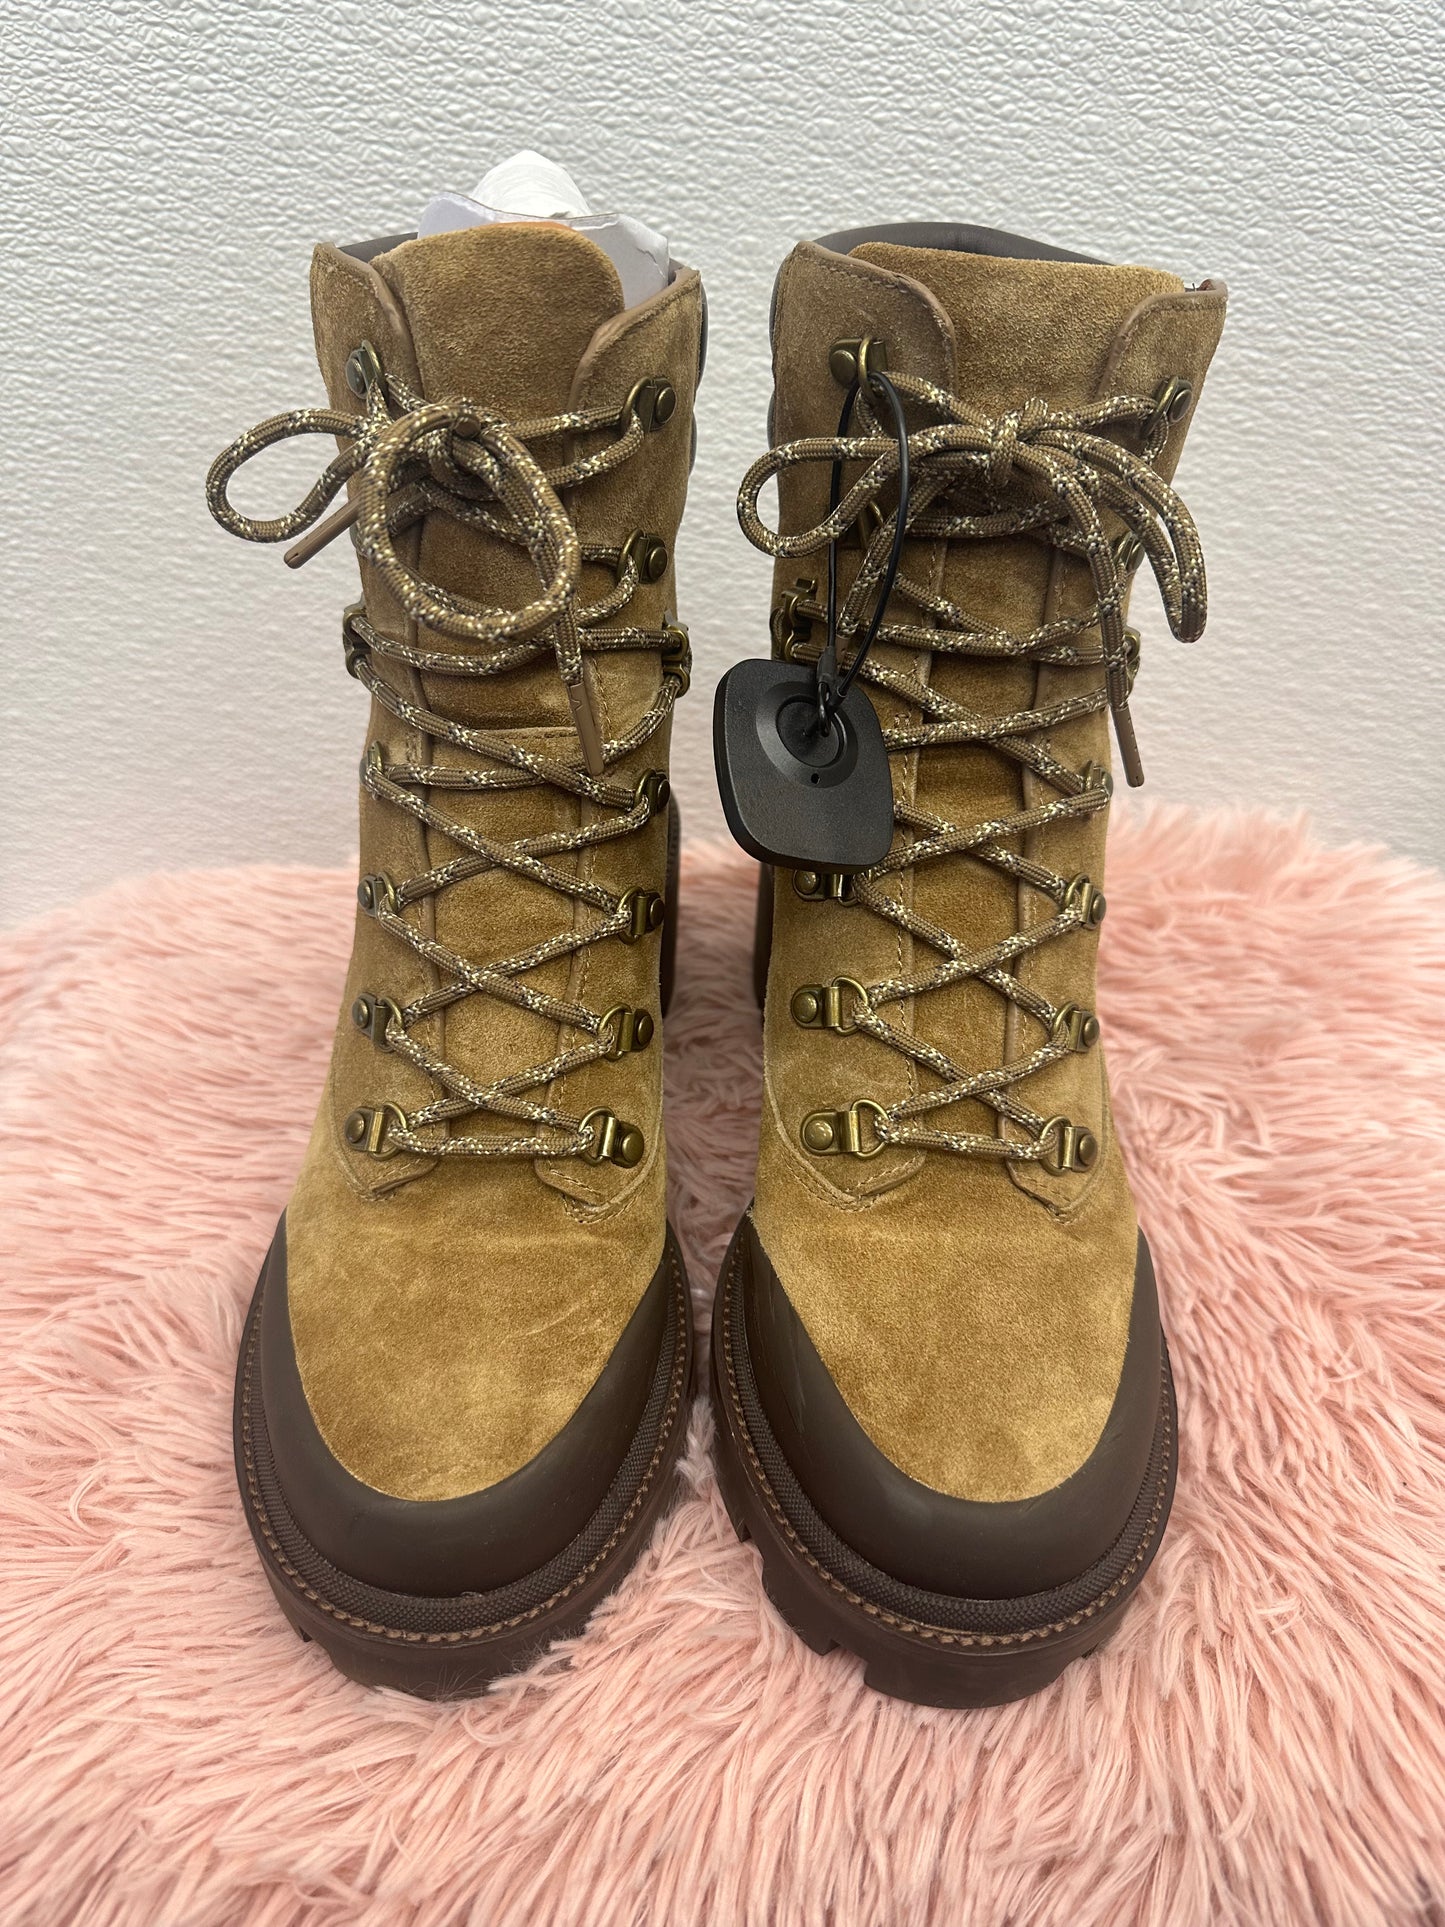 Boots Designer By Tory Burch  Size: 11